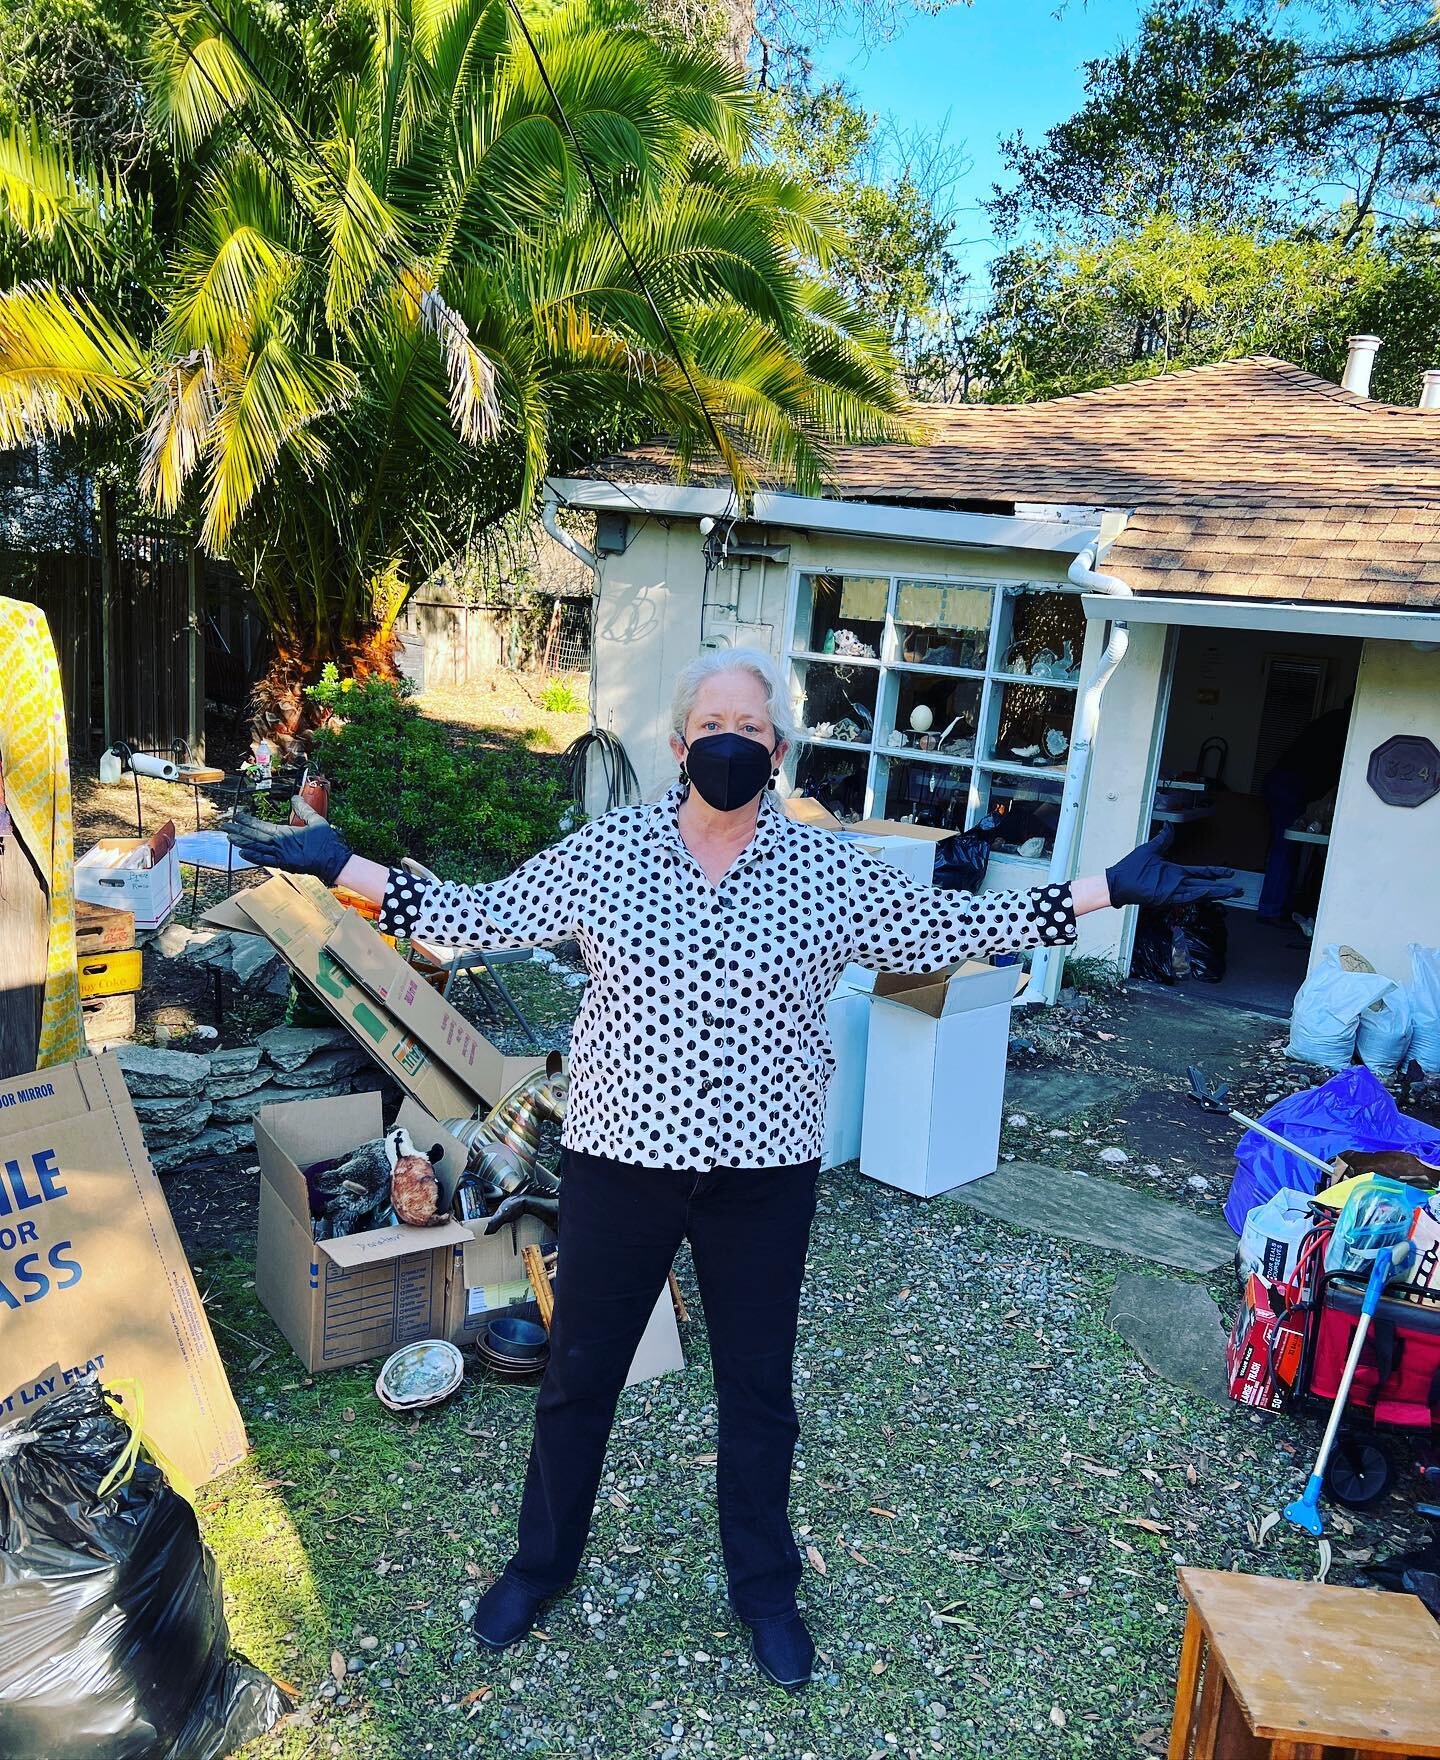 Today's outfit and fashion for estate clean outs...
#itsabreezemoving 
#innoparticularorder 
#estatecleanouts
#responsibledispersal
#movecoordinationspecialist 
#movecoordination 
#movecoordinator 
#todaysfashion